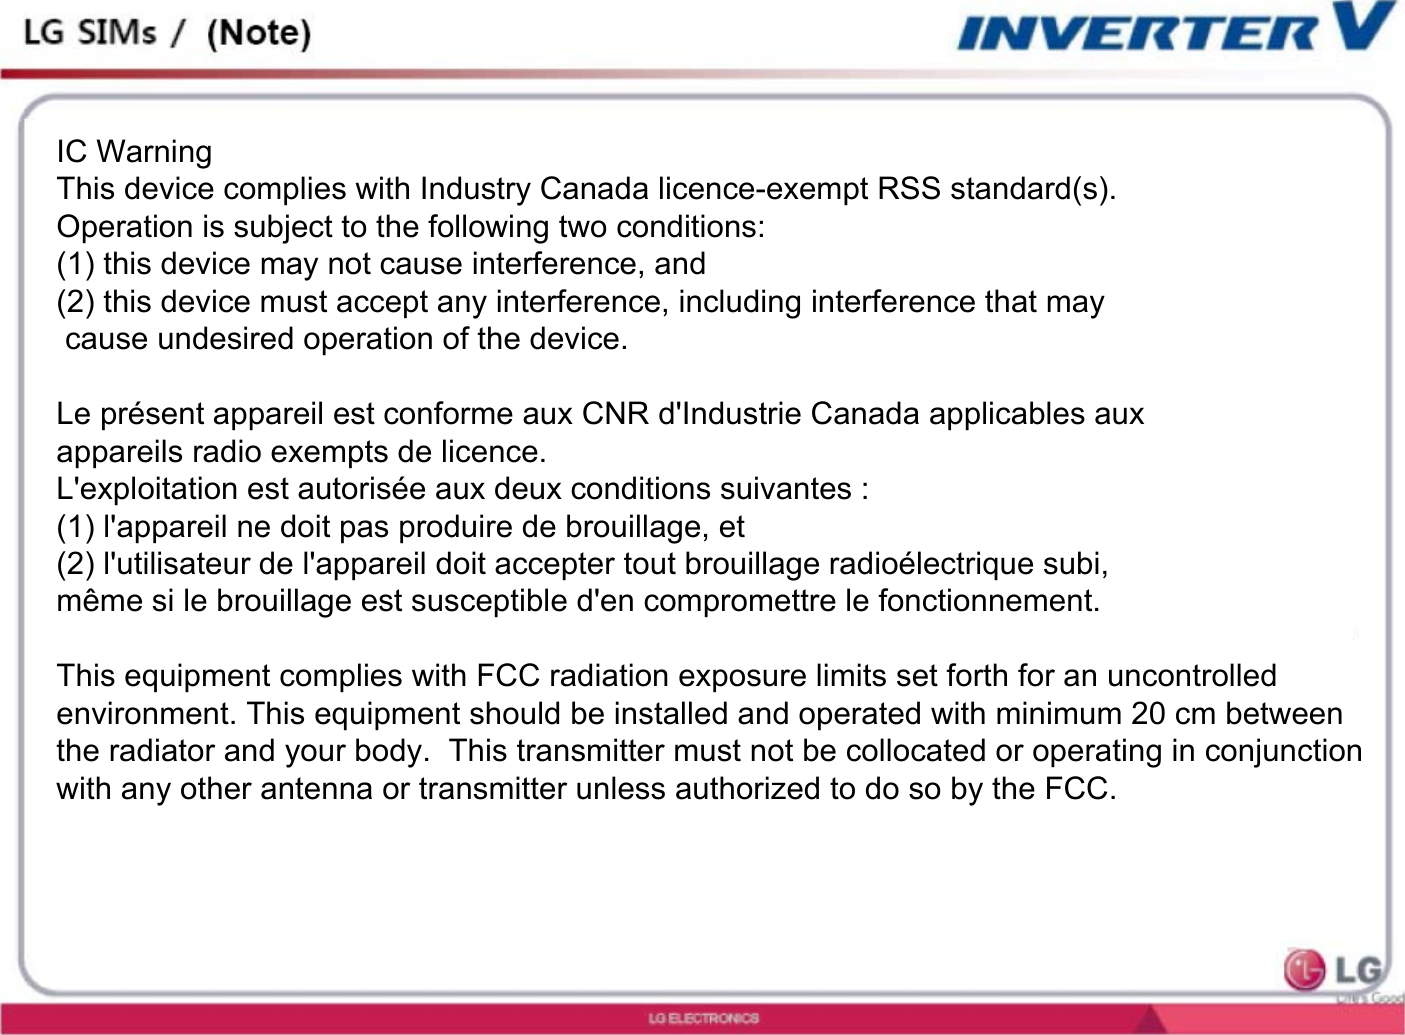 IC WarningThis device complies with Industry Canada licence-exempt RSS standard(s). Operation is subject to the following two conditions: (1) this device may not cause interference, and (2) this device must accept any interference, including interference that may cause undesired operation of the device.Le présent appareil est conforme aux CNR d&apos;Industrie Canada applicables aux appareils radio exempts de licence. L&apos;exploitation est autorisée aux deux conditions suivantes : (1) l&apos;appareil ne doit pas produire de brouillage, et (2) l&apos;utilisateur de l&apos;appareil doit accepter tout brouillage radioélectrique subi, même si le brouillage est susceptible d&apos;en compromettre le fonctionnement. This equipment complies with FCC radiation exposure limits set forth for an uncontrolled environment. This equipment should be installed and operated with minimum 20 cm between the radiator and your body.  This transmitter must not be collocated or operating in conjunction with any other antenna or transmitter unless authorized to do so by the FCC.   